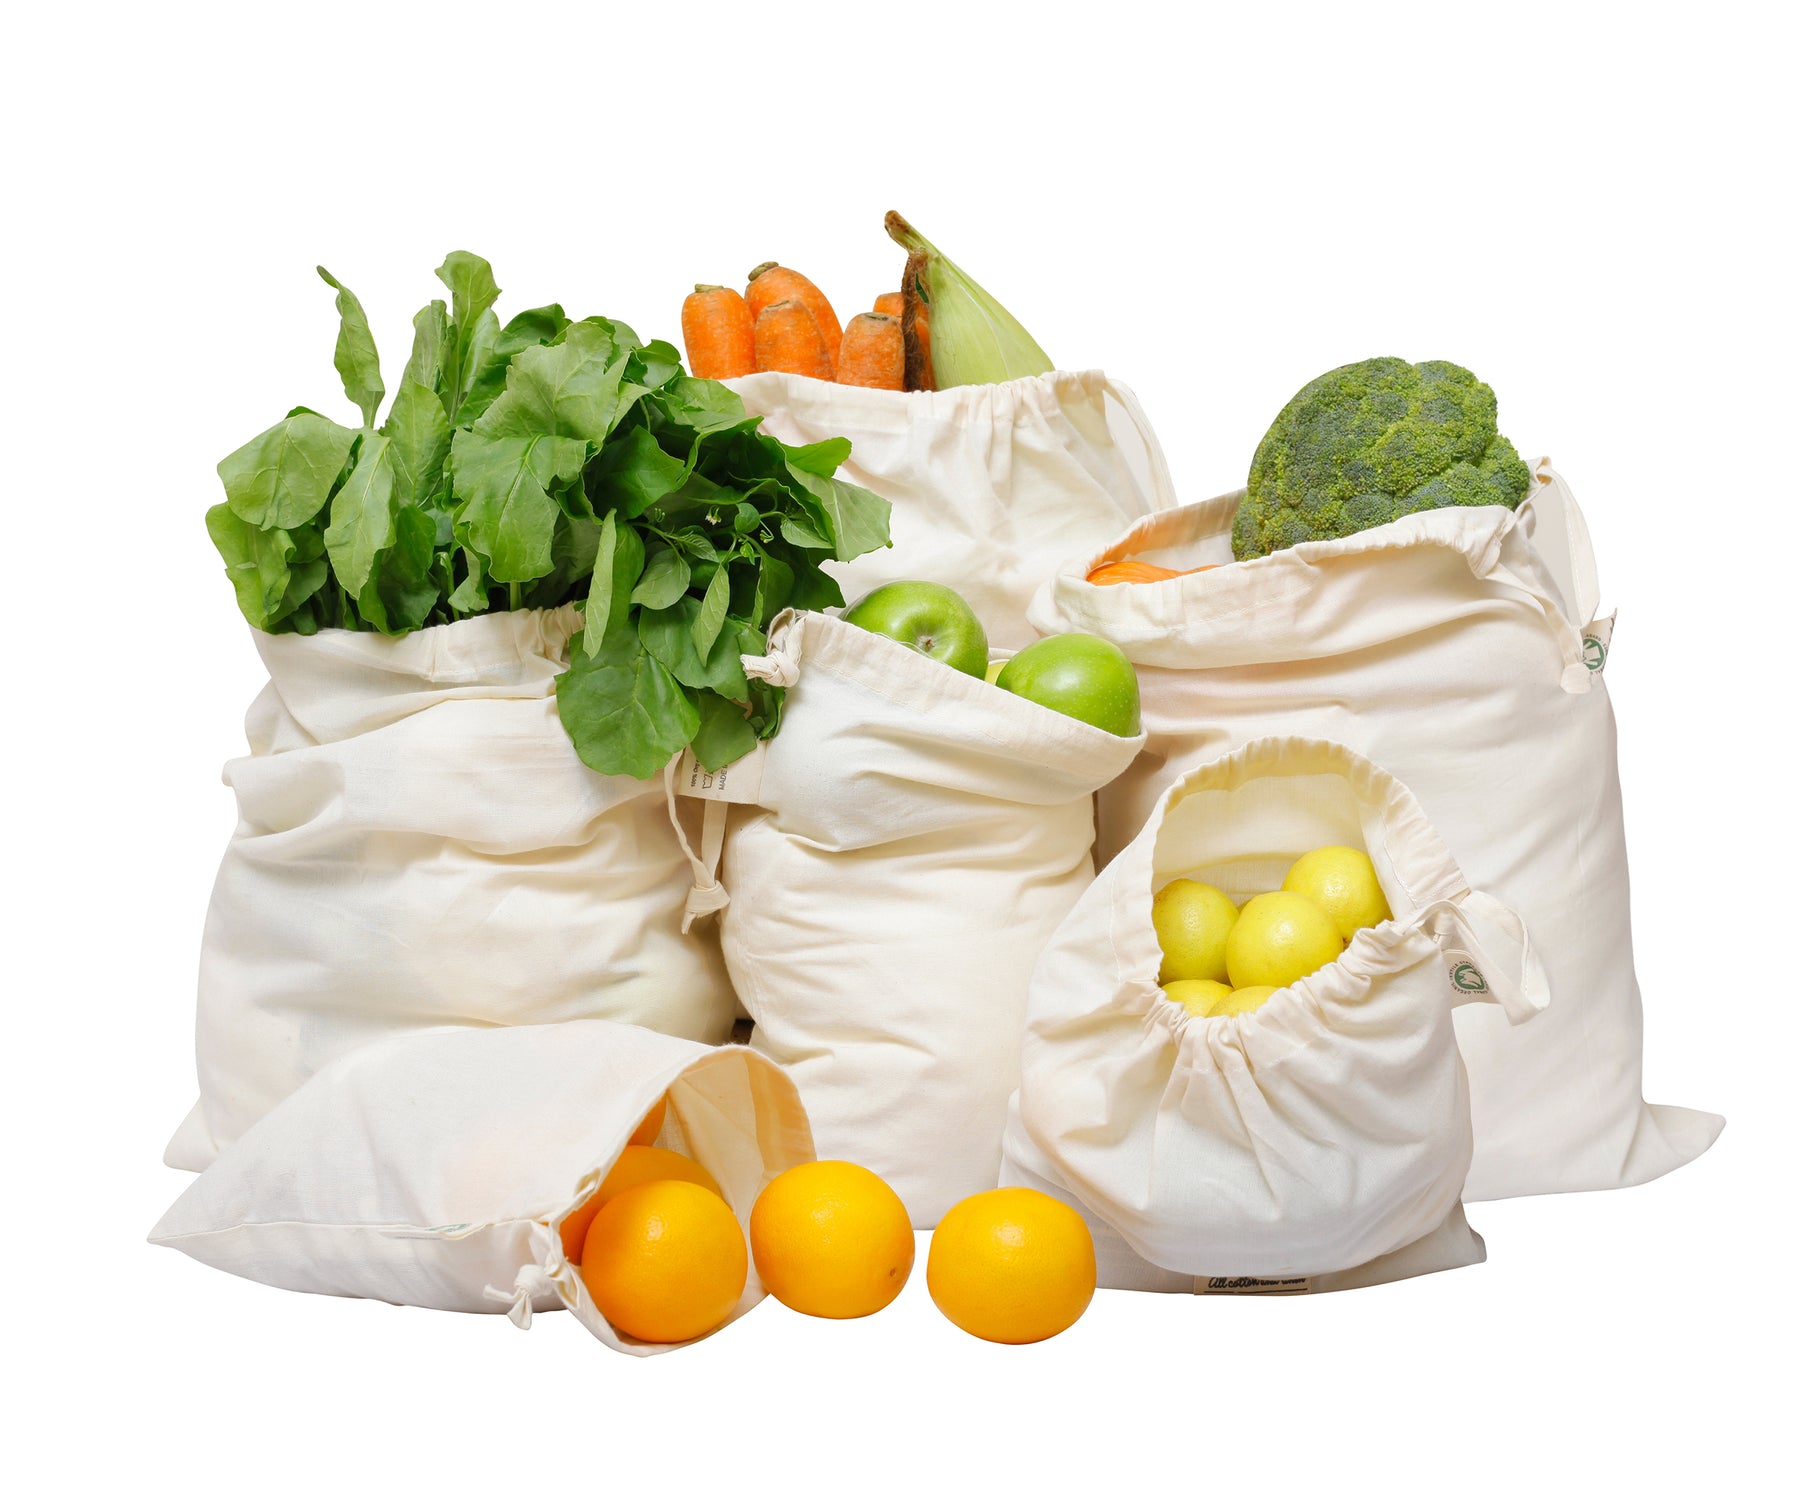 Support sustainable practices by selecting muslin drawstring bags, cotton muslin bags, cotton mesh produce bags, and reusable cotton produce bags. These options prioritize eco-friendly packaging and storage, minimizing waste and contributing to a more environmentally conscious future.